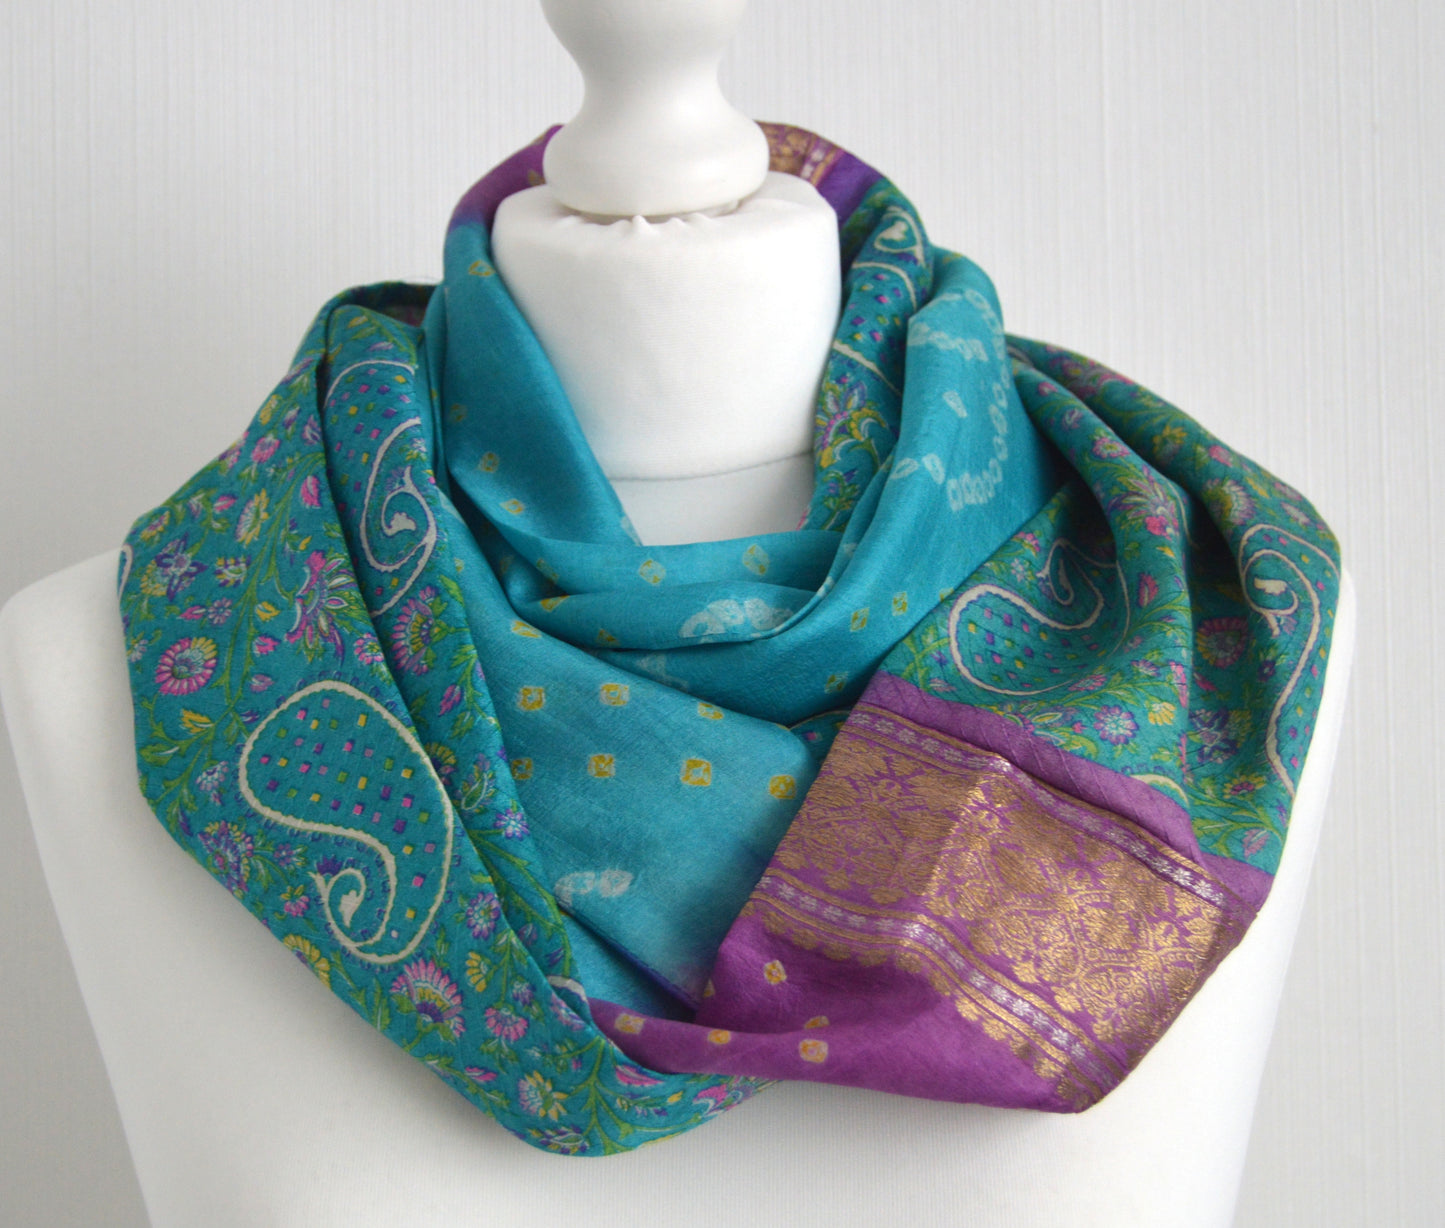 Turquoise Mauve Sari Silk Scarf - Silk Infinity Scarf - Indian Silk Scarf - Womens Scarf - Gift for Her - Boho Scarf - Unique Gift